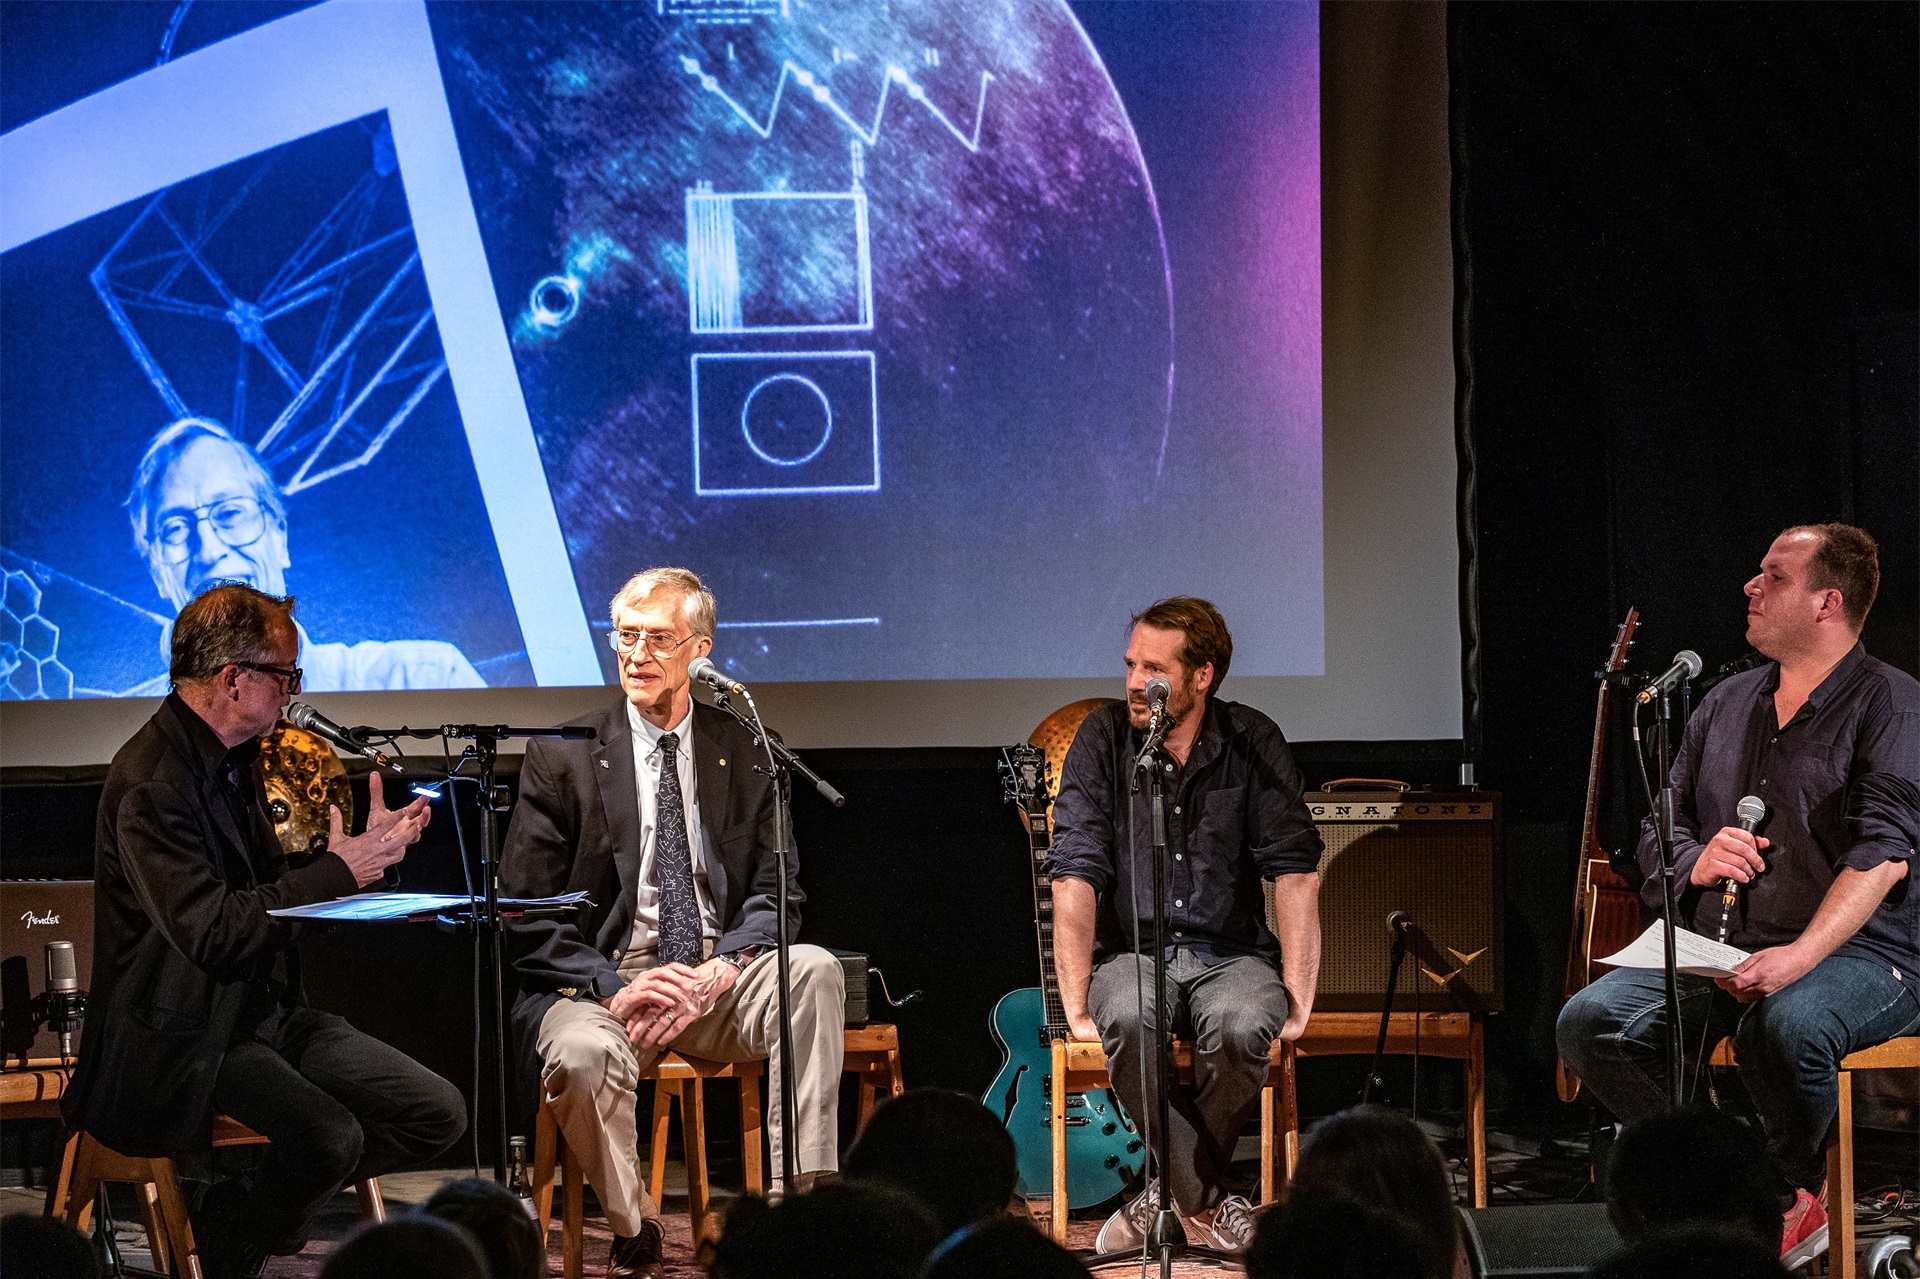 Voyager III – A Musical Journey Through Interstellar Space  (2019) - Nobel Laureate John C. Mather and singer-songwriter Gisbert zu Knyphausen, as well as musicians Hank Shizzoe, Michael Flury and director Verena Regensburger, take part in a thought experiment on which items of science and art should be included in the next golden record. This event has been a cooperation between Lindau Nobel Laureate Meetings and Zeughaus Lindau e. V.